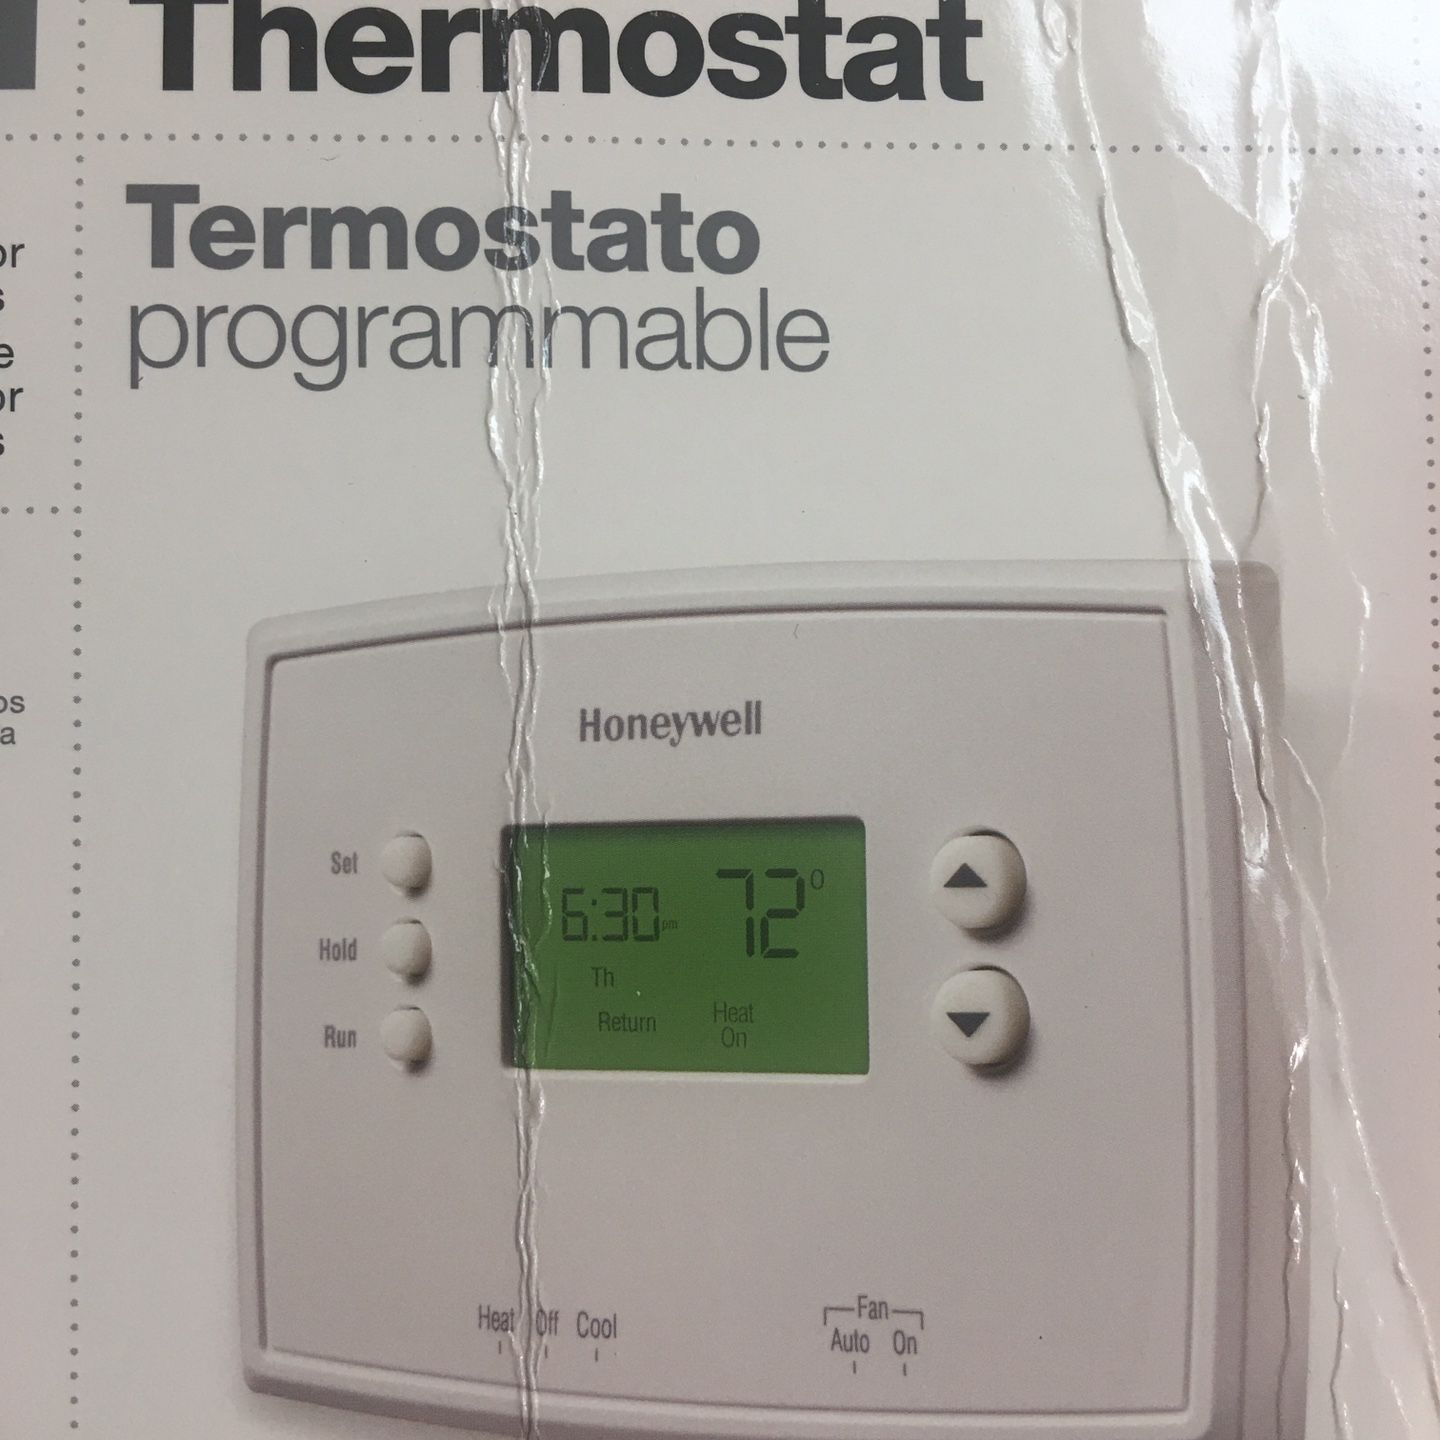 5-2 Programmable Thermostat